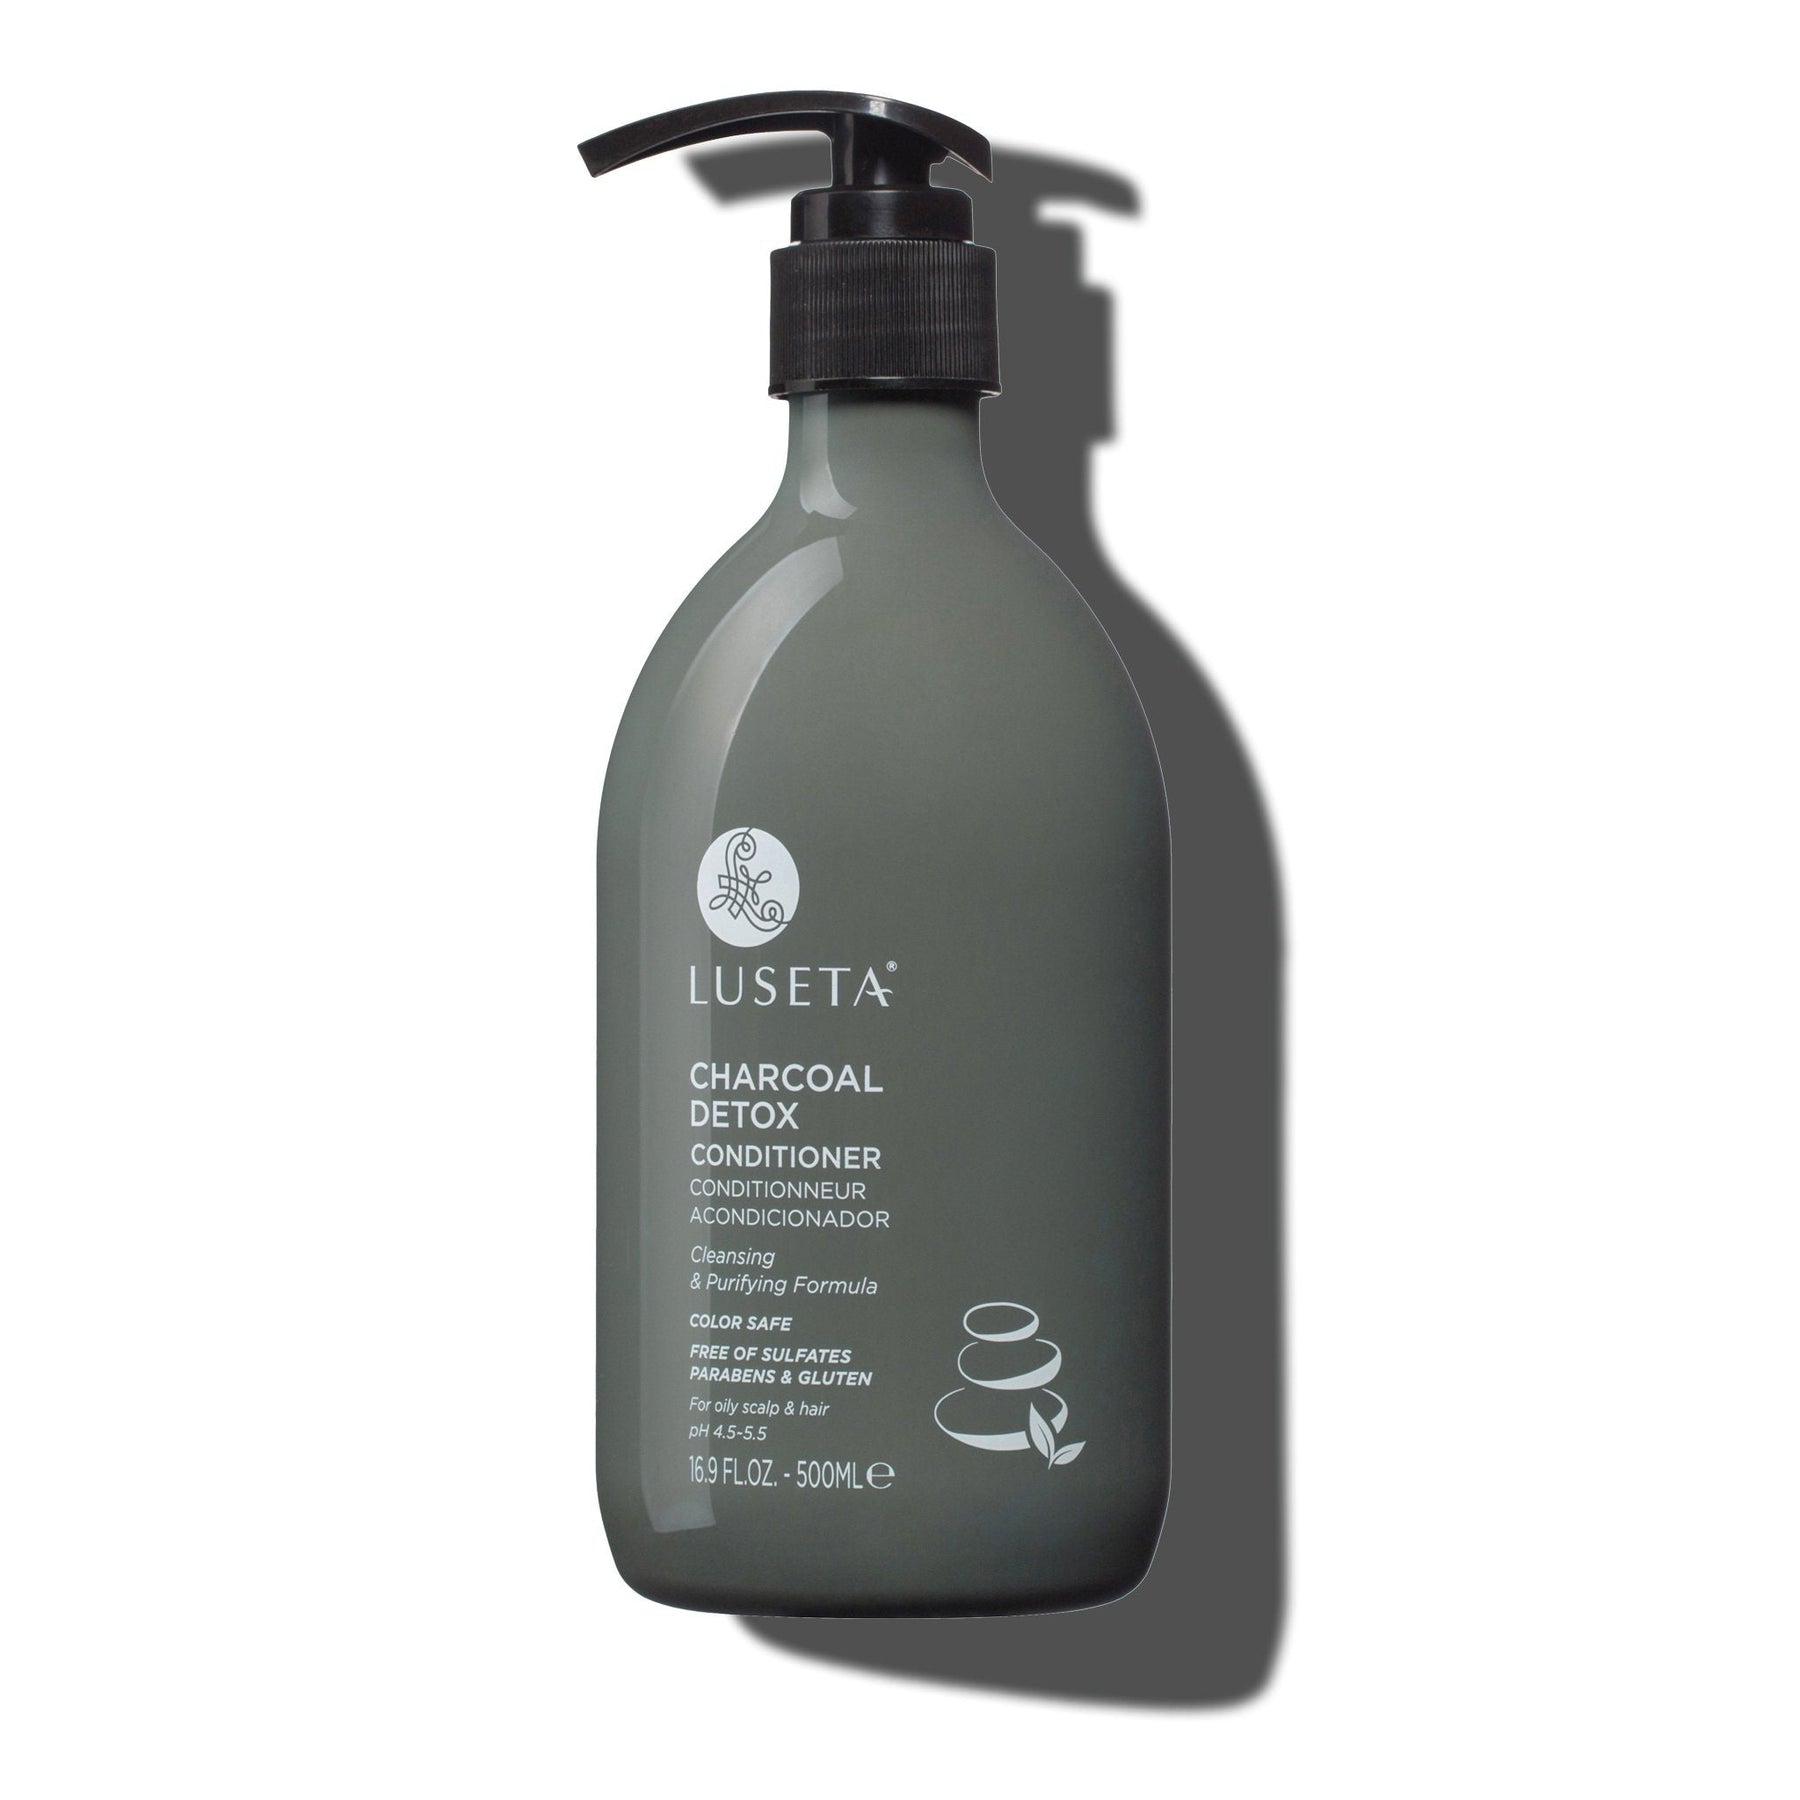 Charcoal Detox Conditioner - by Luseta Beauty |ProCare Outlet|